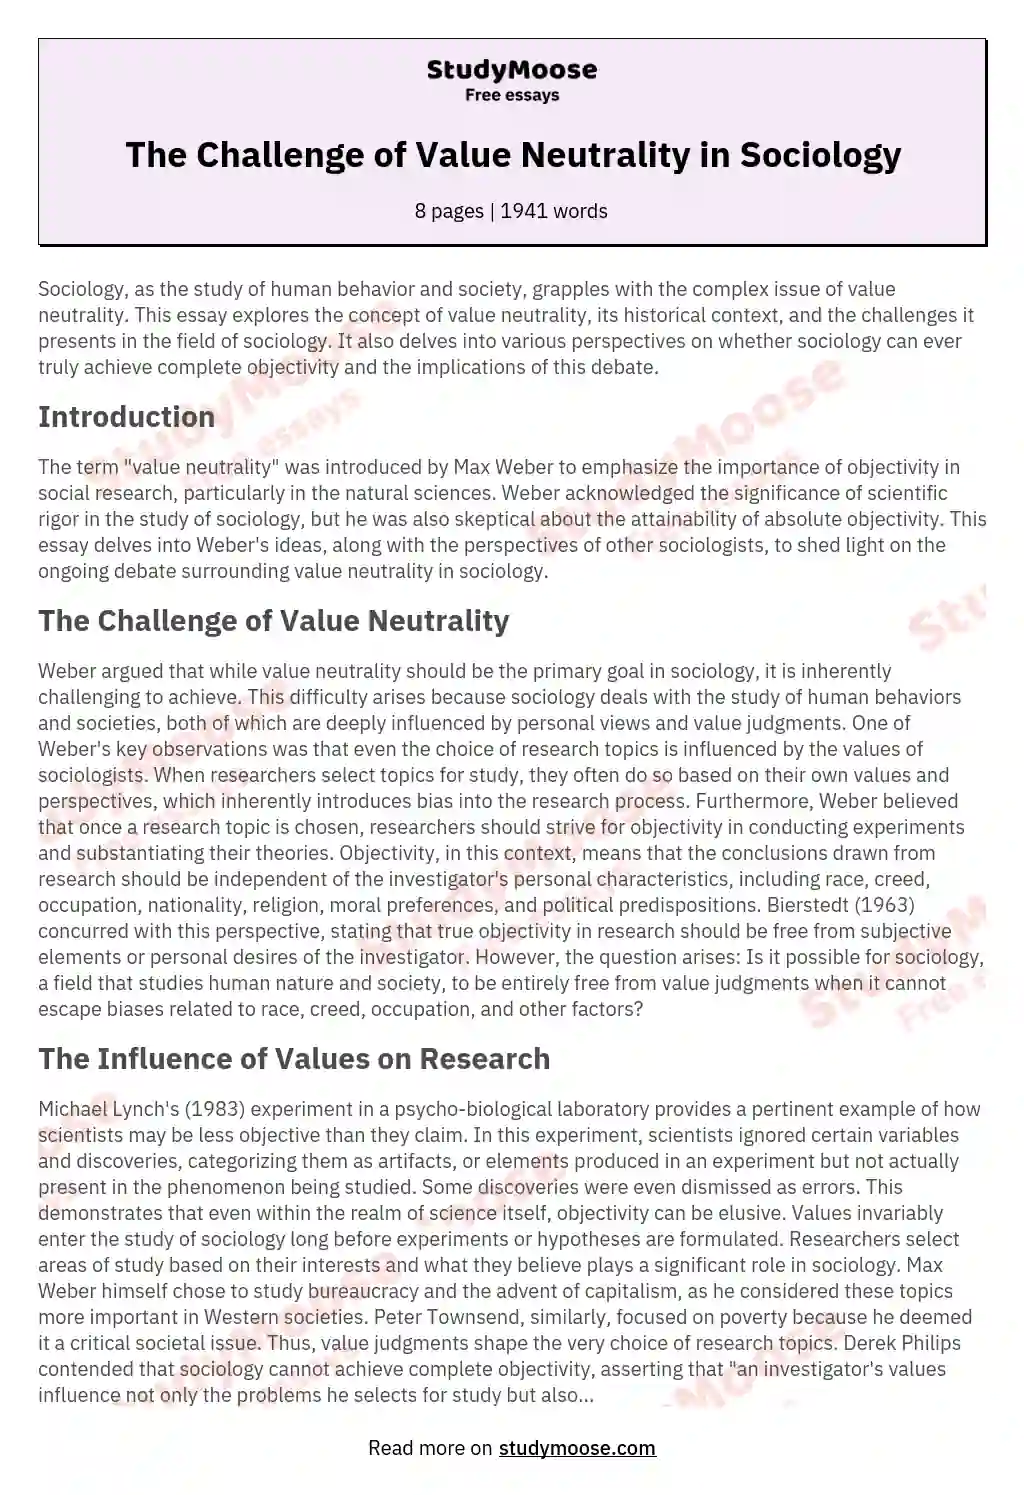 The Challenge of Value Neutrality in Sociology essay